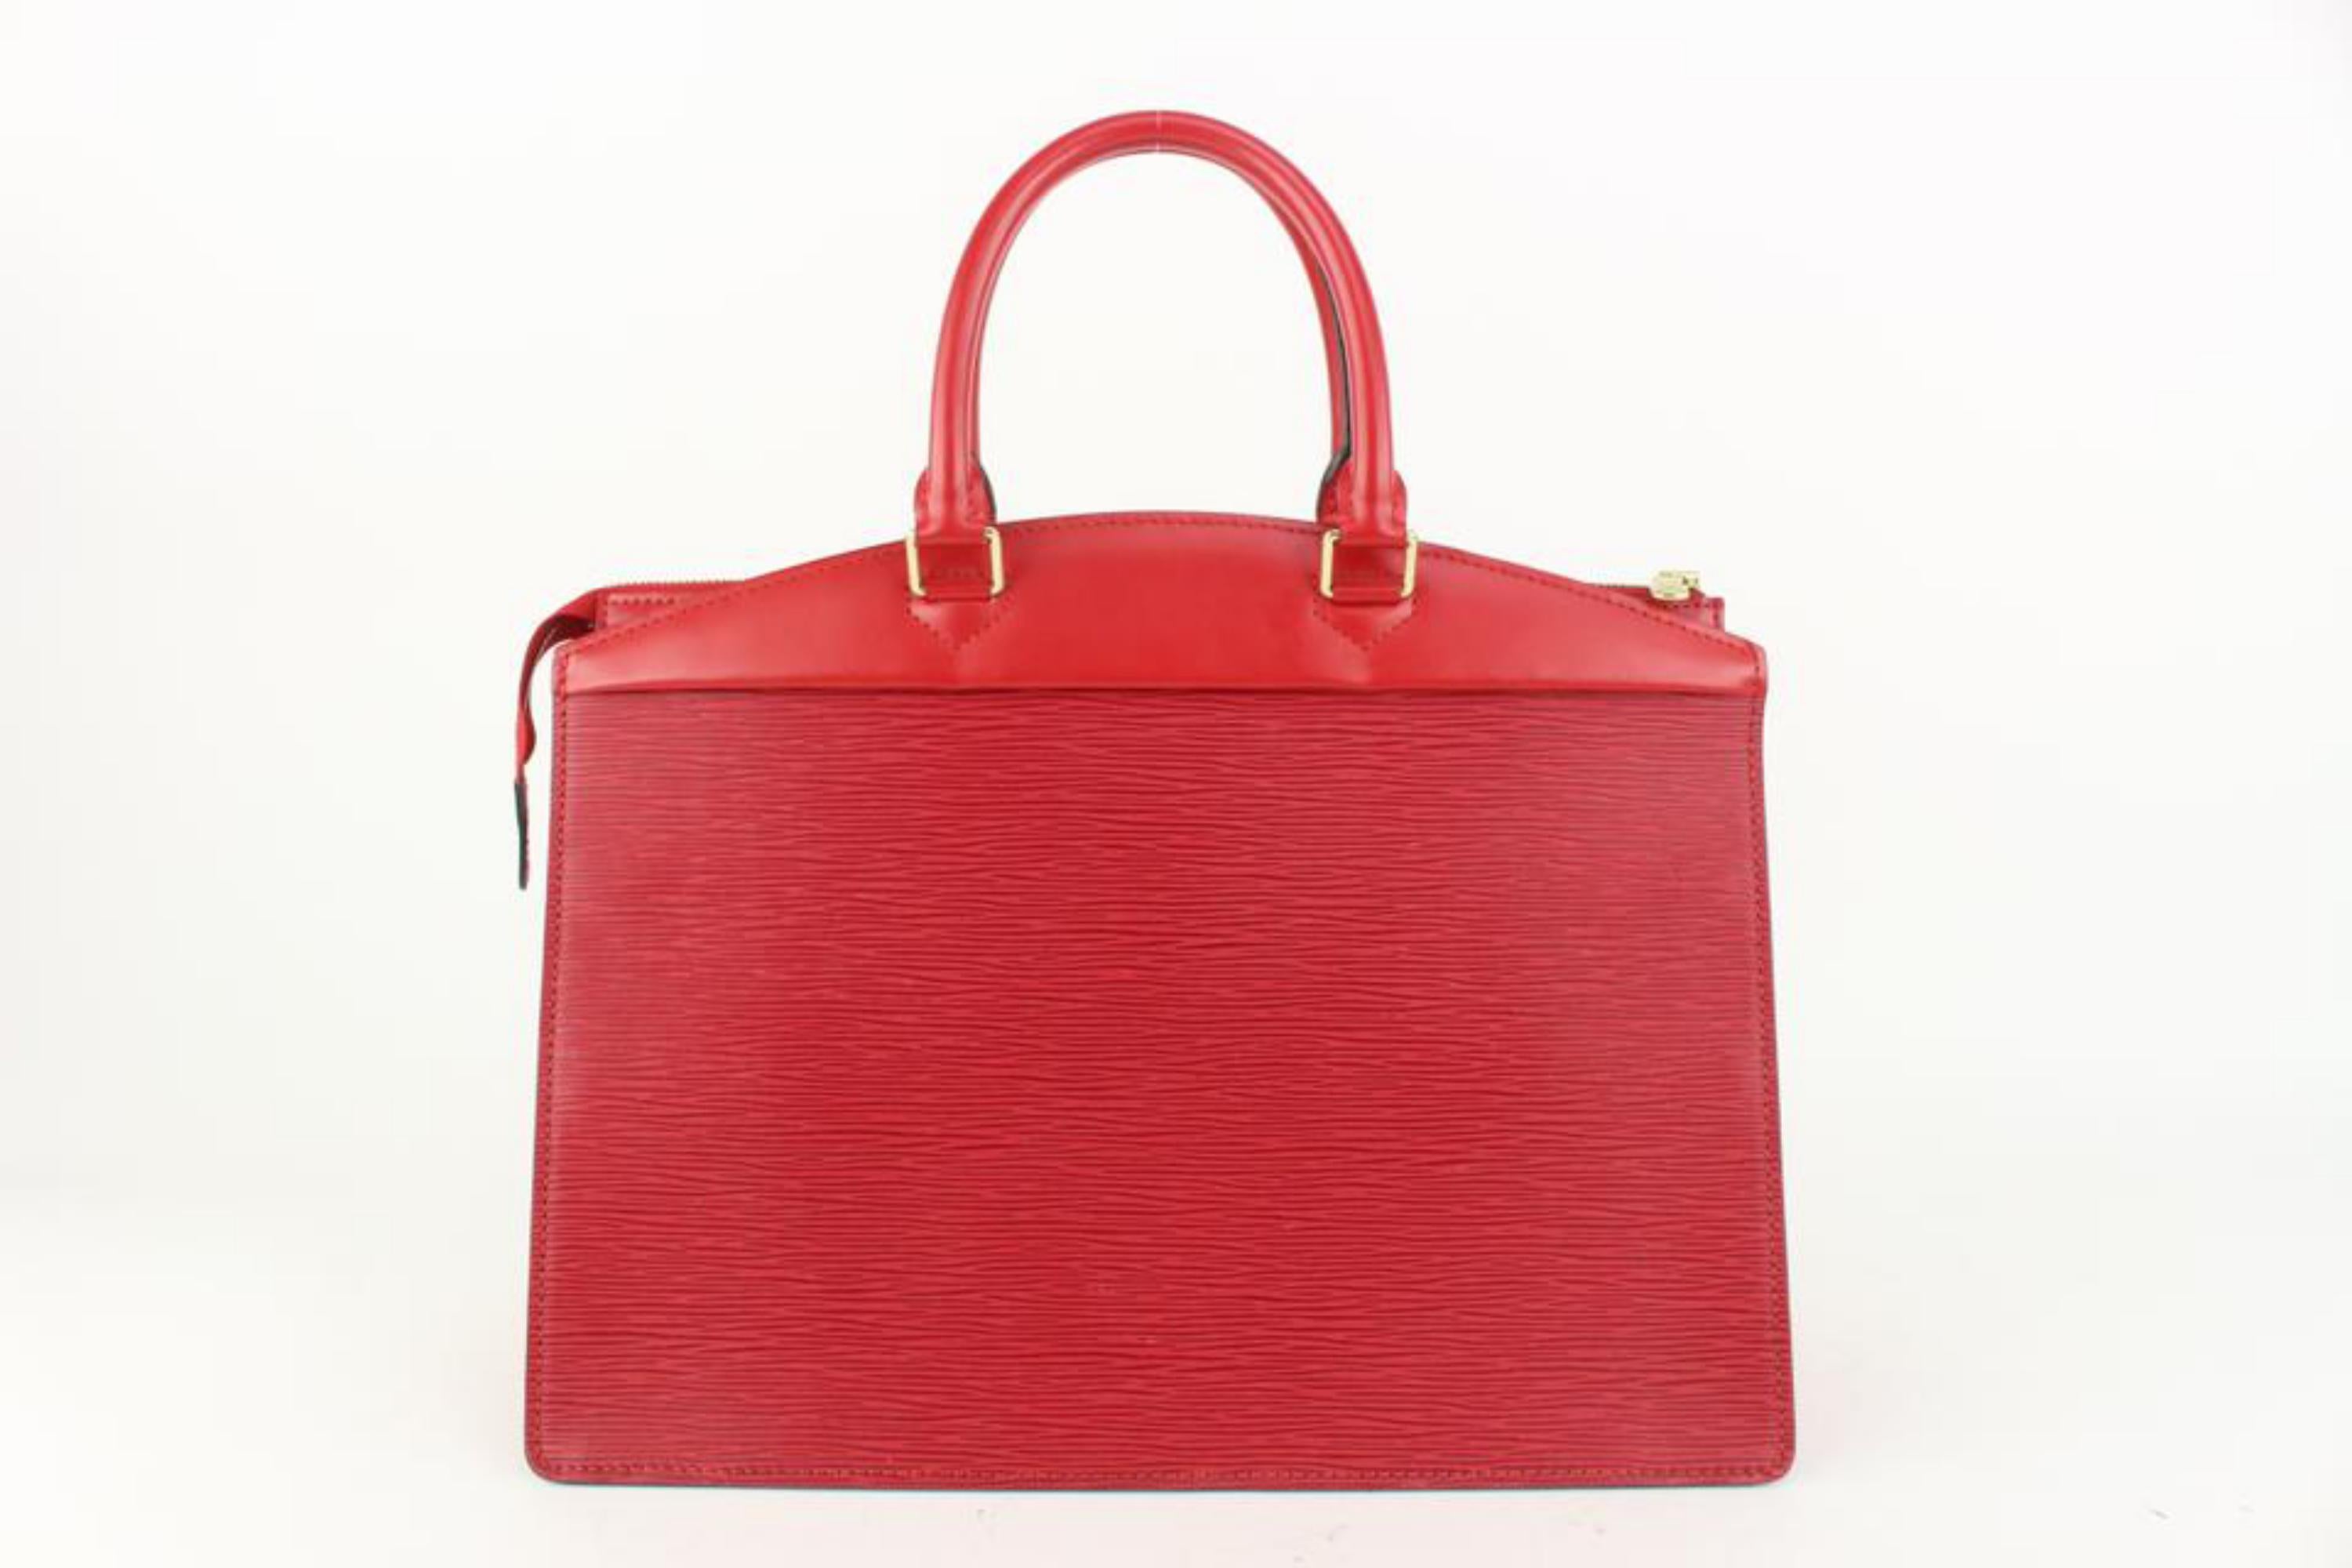 Louis Vuitton Red Epi Leather Riviera Vanity Tote Bag 5L91a1 4